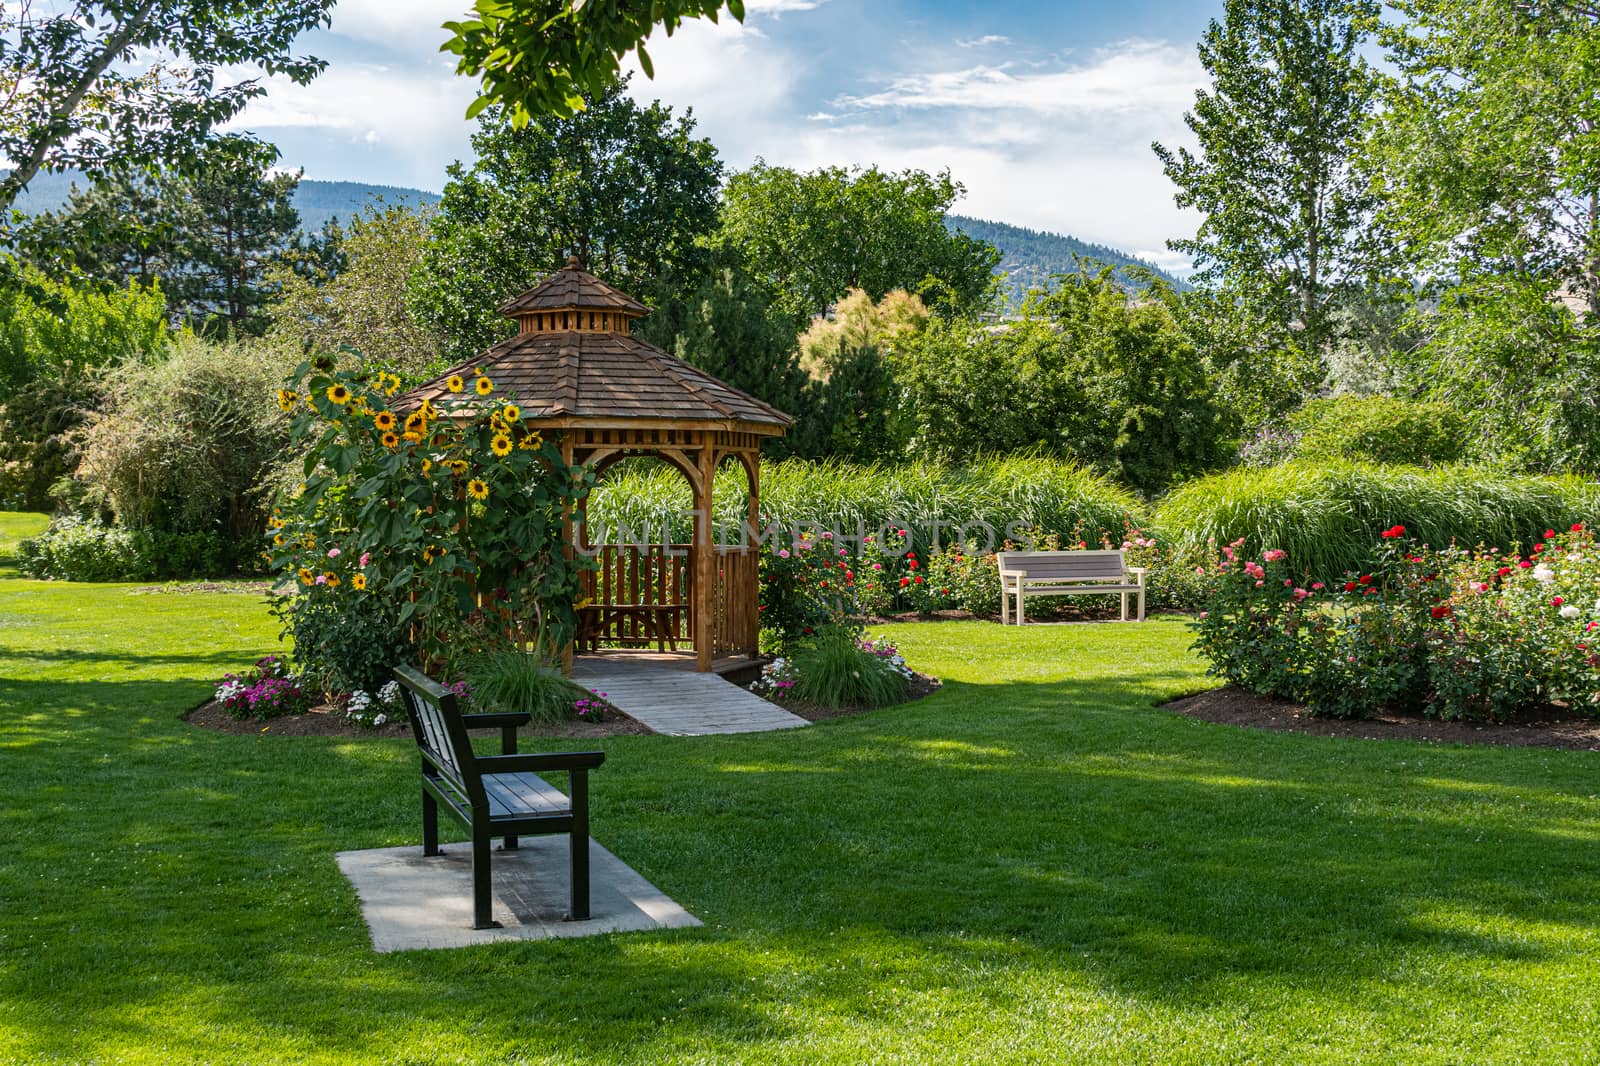 Recreation area in a park with snug cozy gazebo under blossoming sunflowers on sunny summer day. Wooden gazebo in a garden on bright sunny day